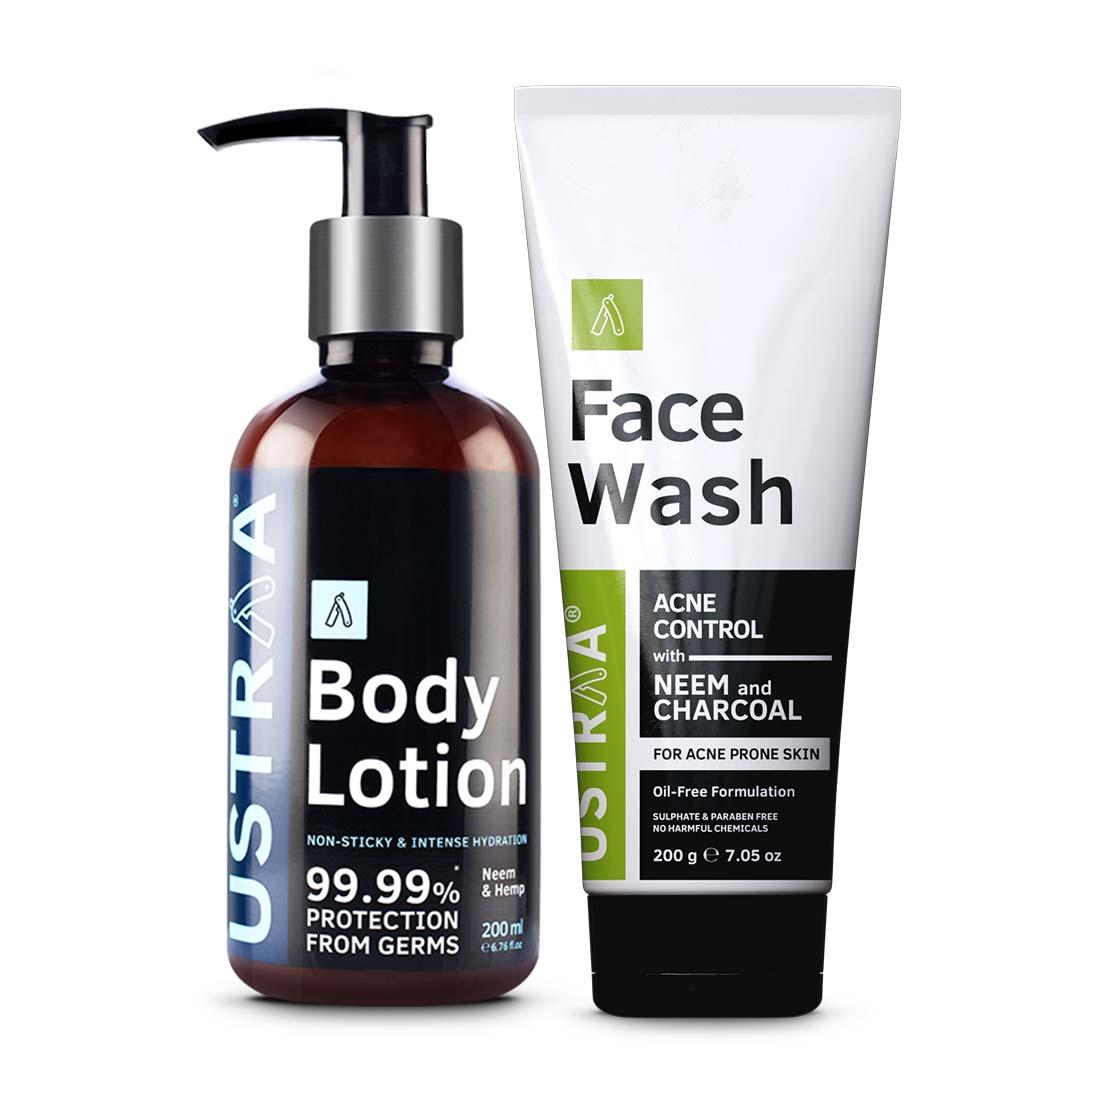 Body Lotion Germ Free & Face Wash Neem Charcoal